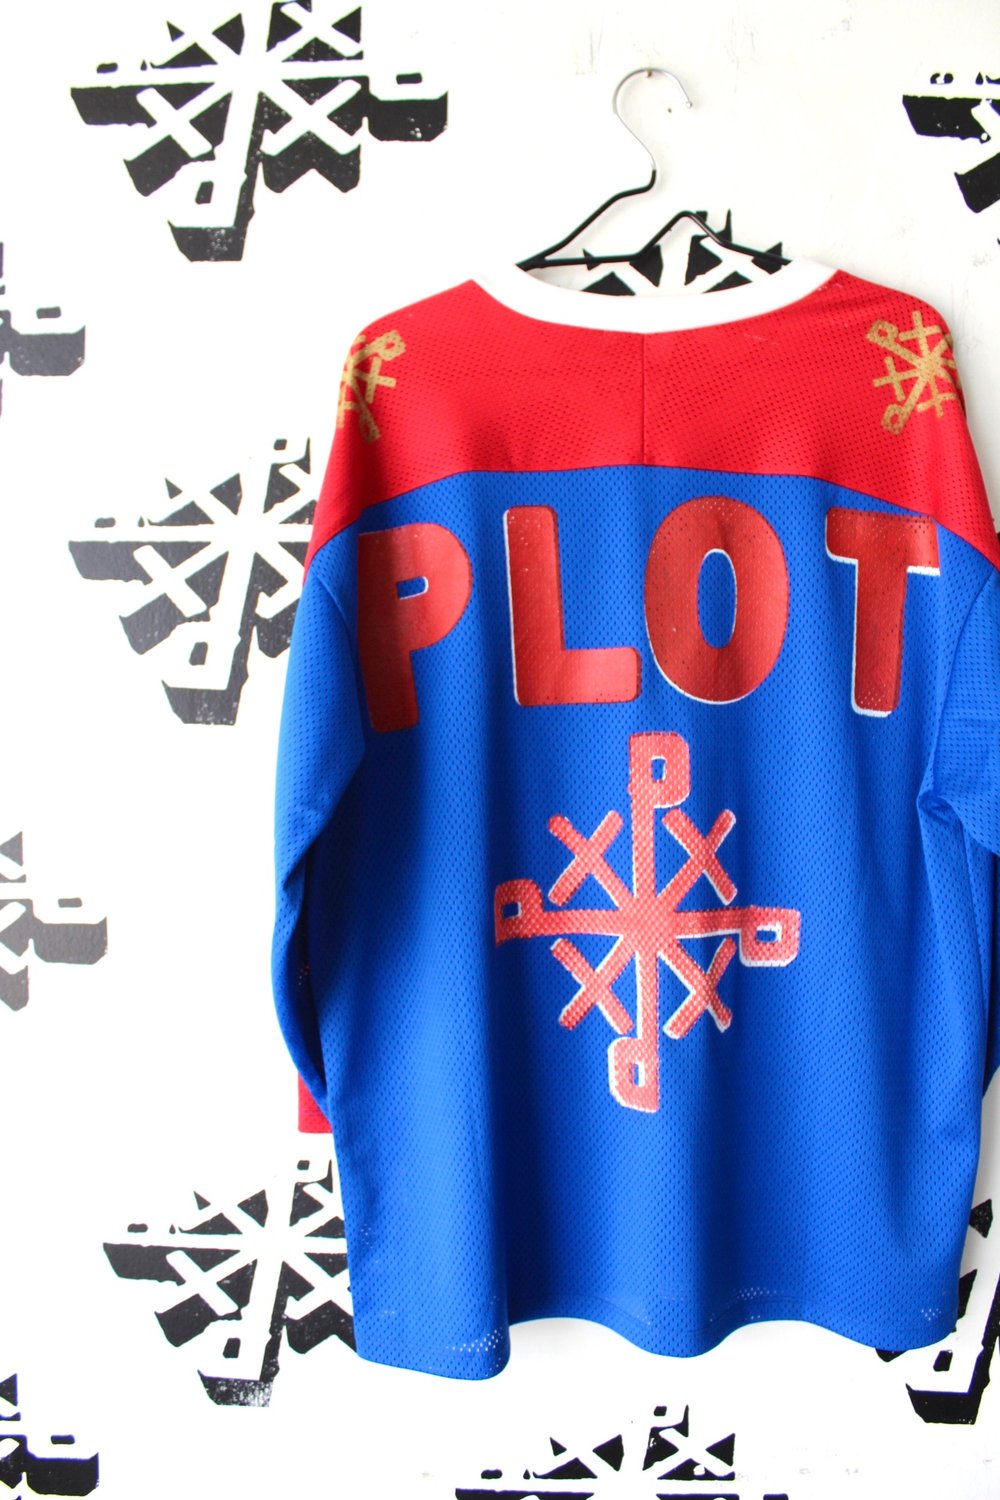 cold player hockey jersey in red/wht/blue